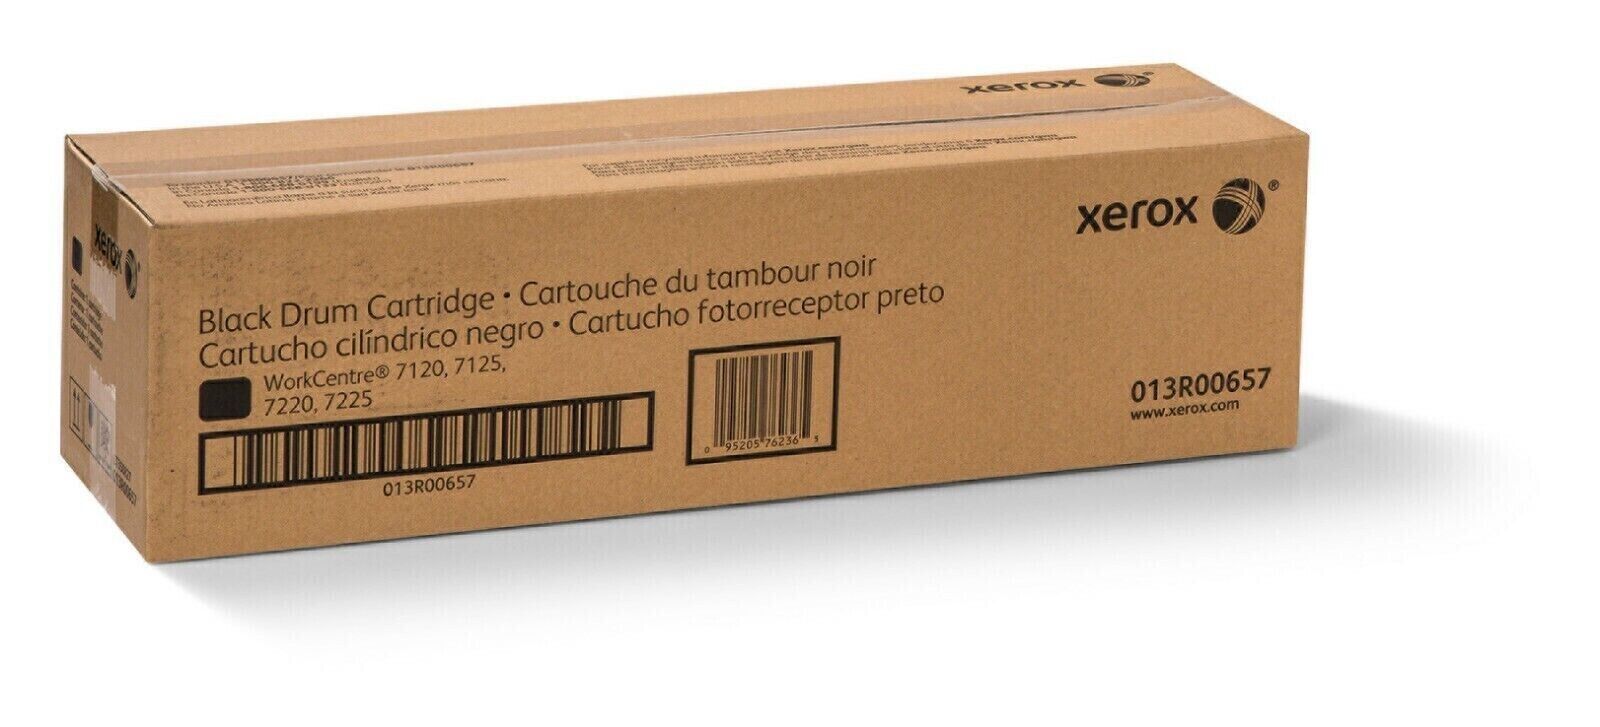 New Xerox 013R00657 Drum Original Black For The WorkCentre 7120/7125/7220i/7225i